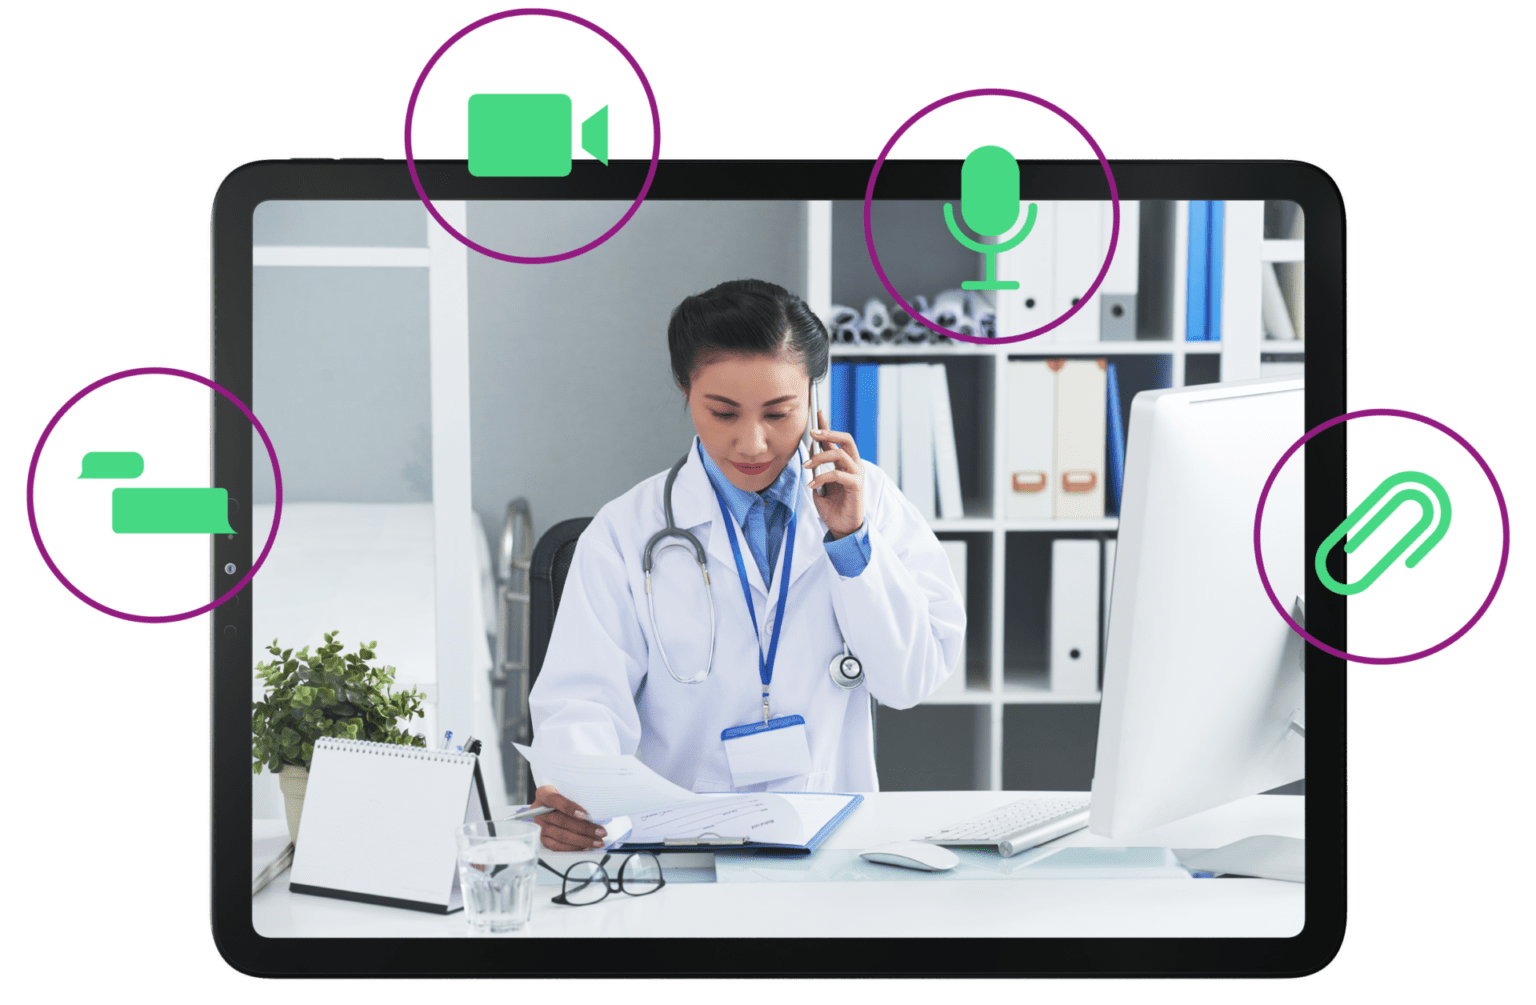 How can Telemedicine Help with the COVID-19 Pandemic?